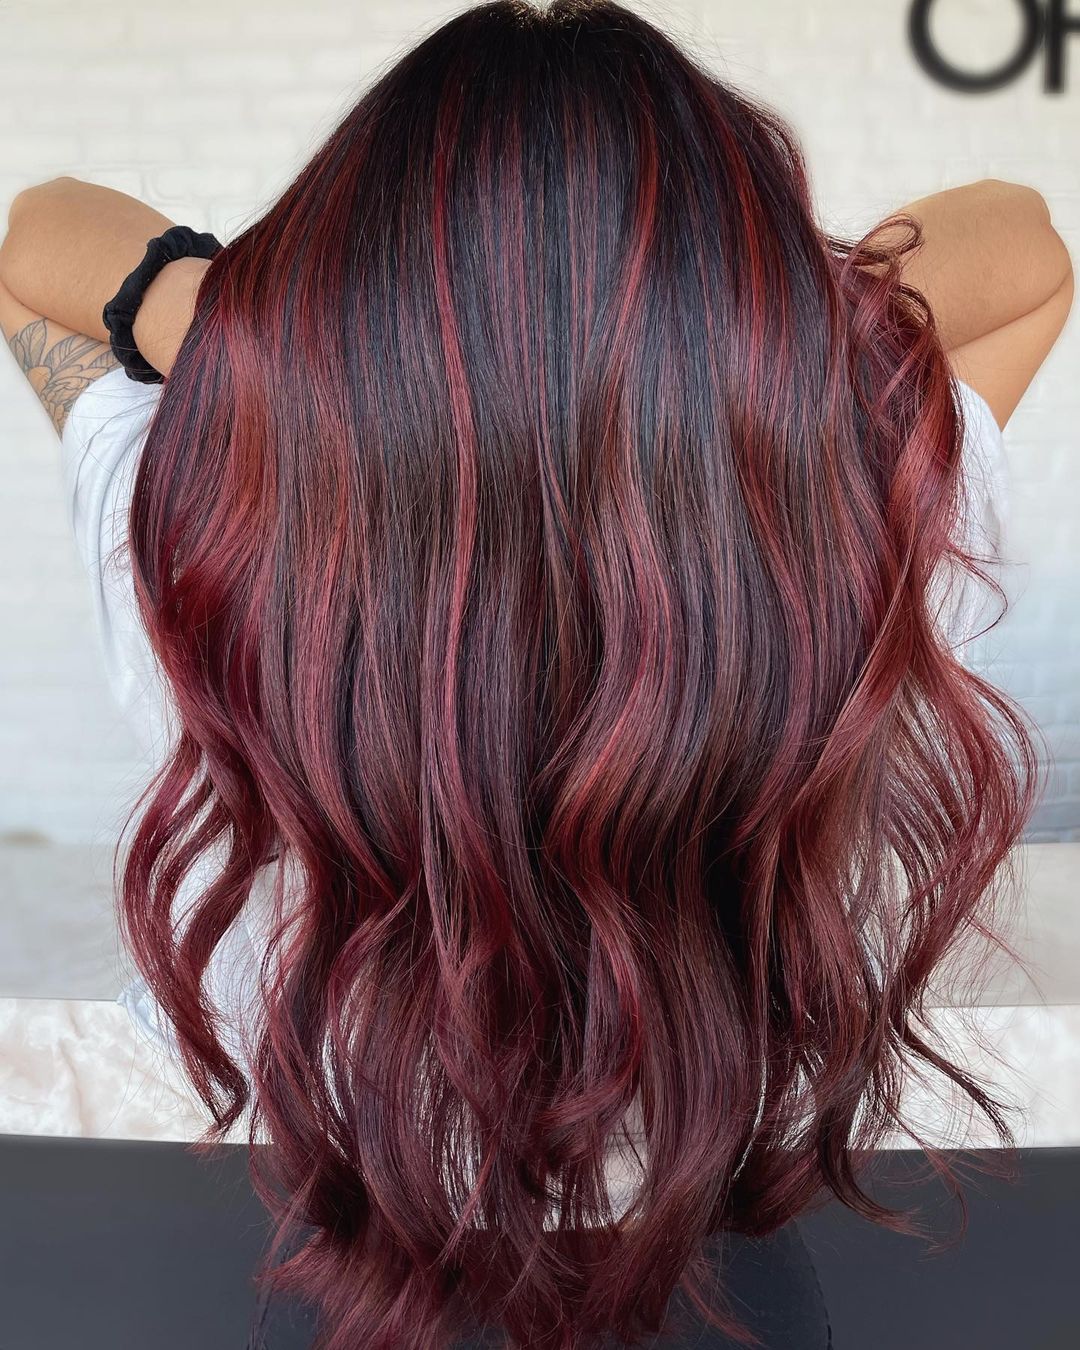 Straight Dark Brown Hair with Red Highlights